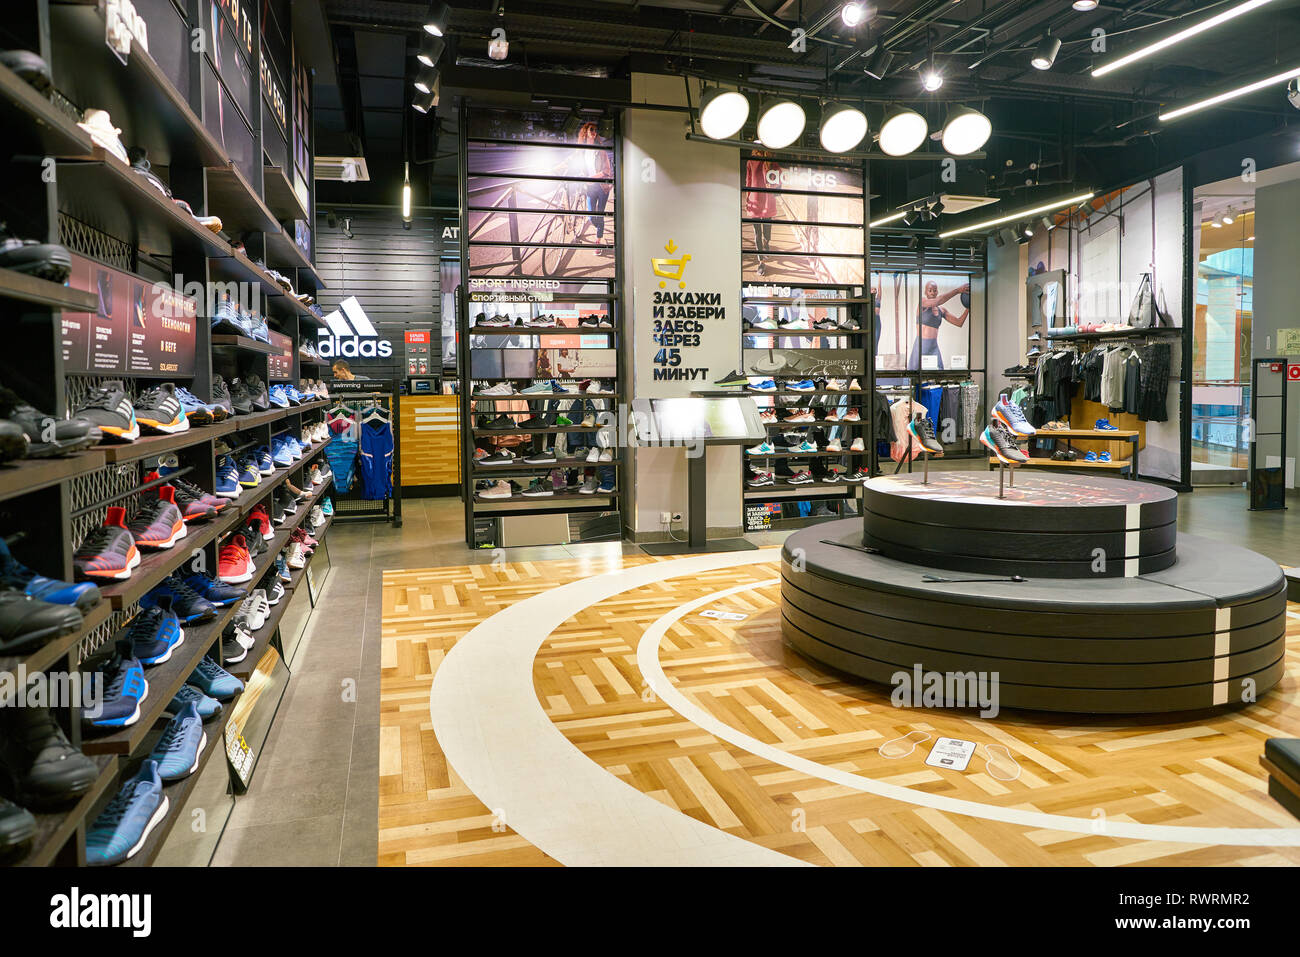 Adidas store interior stock photography images -